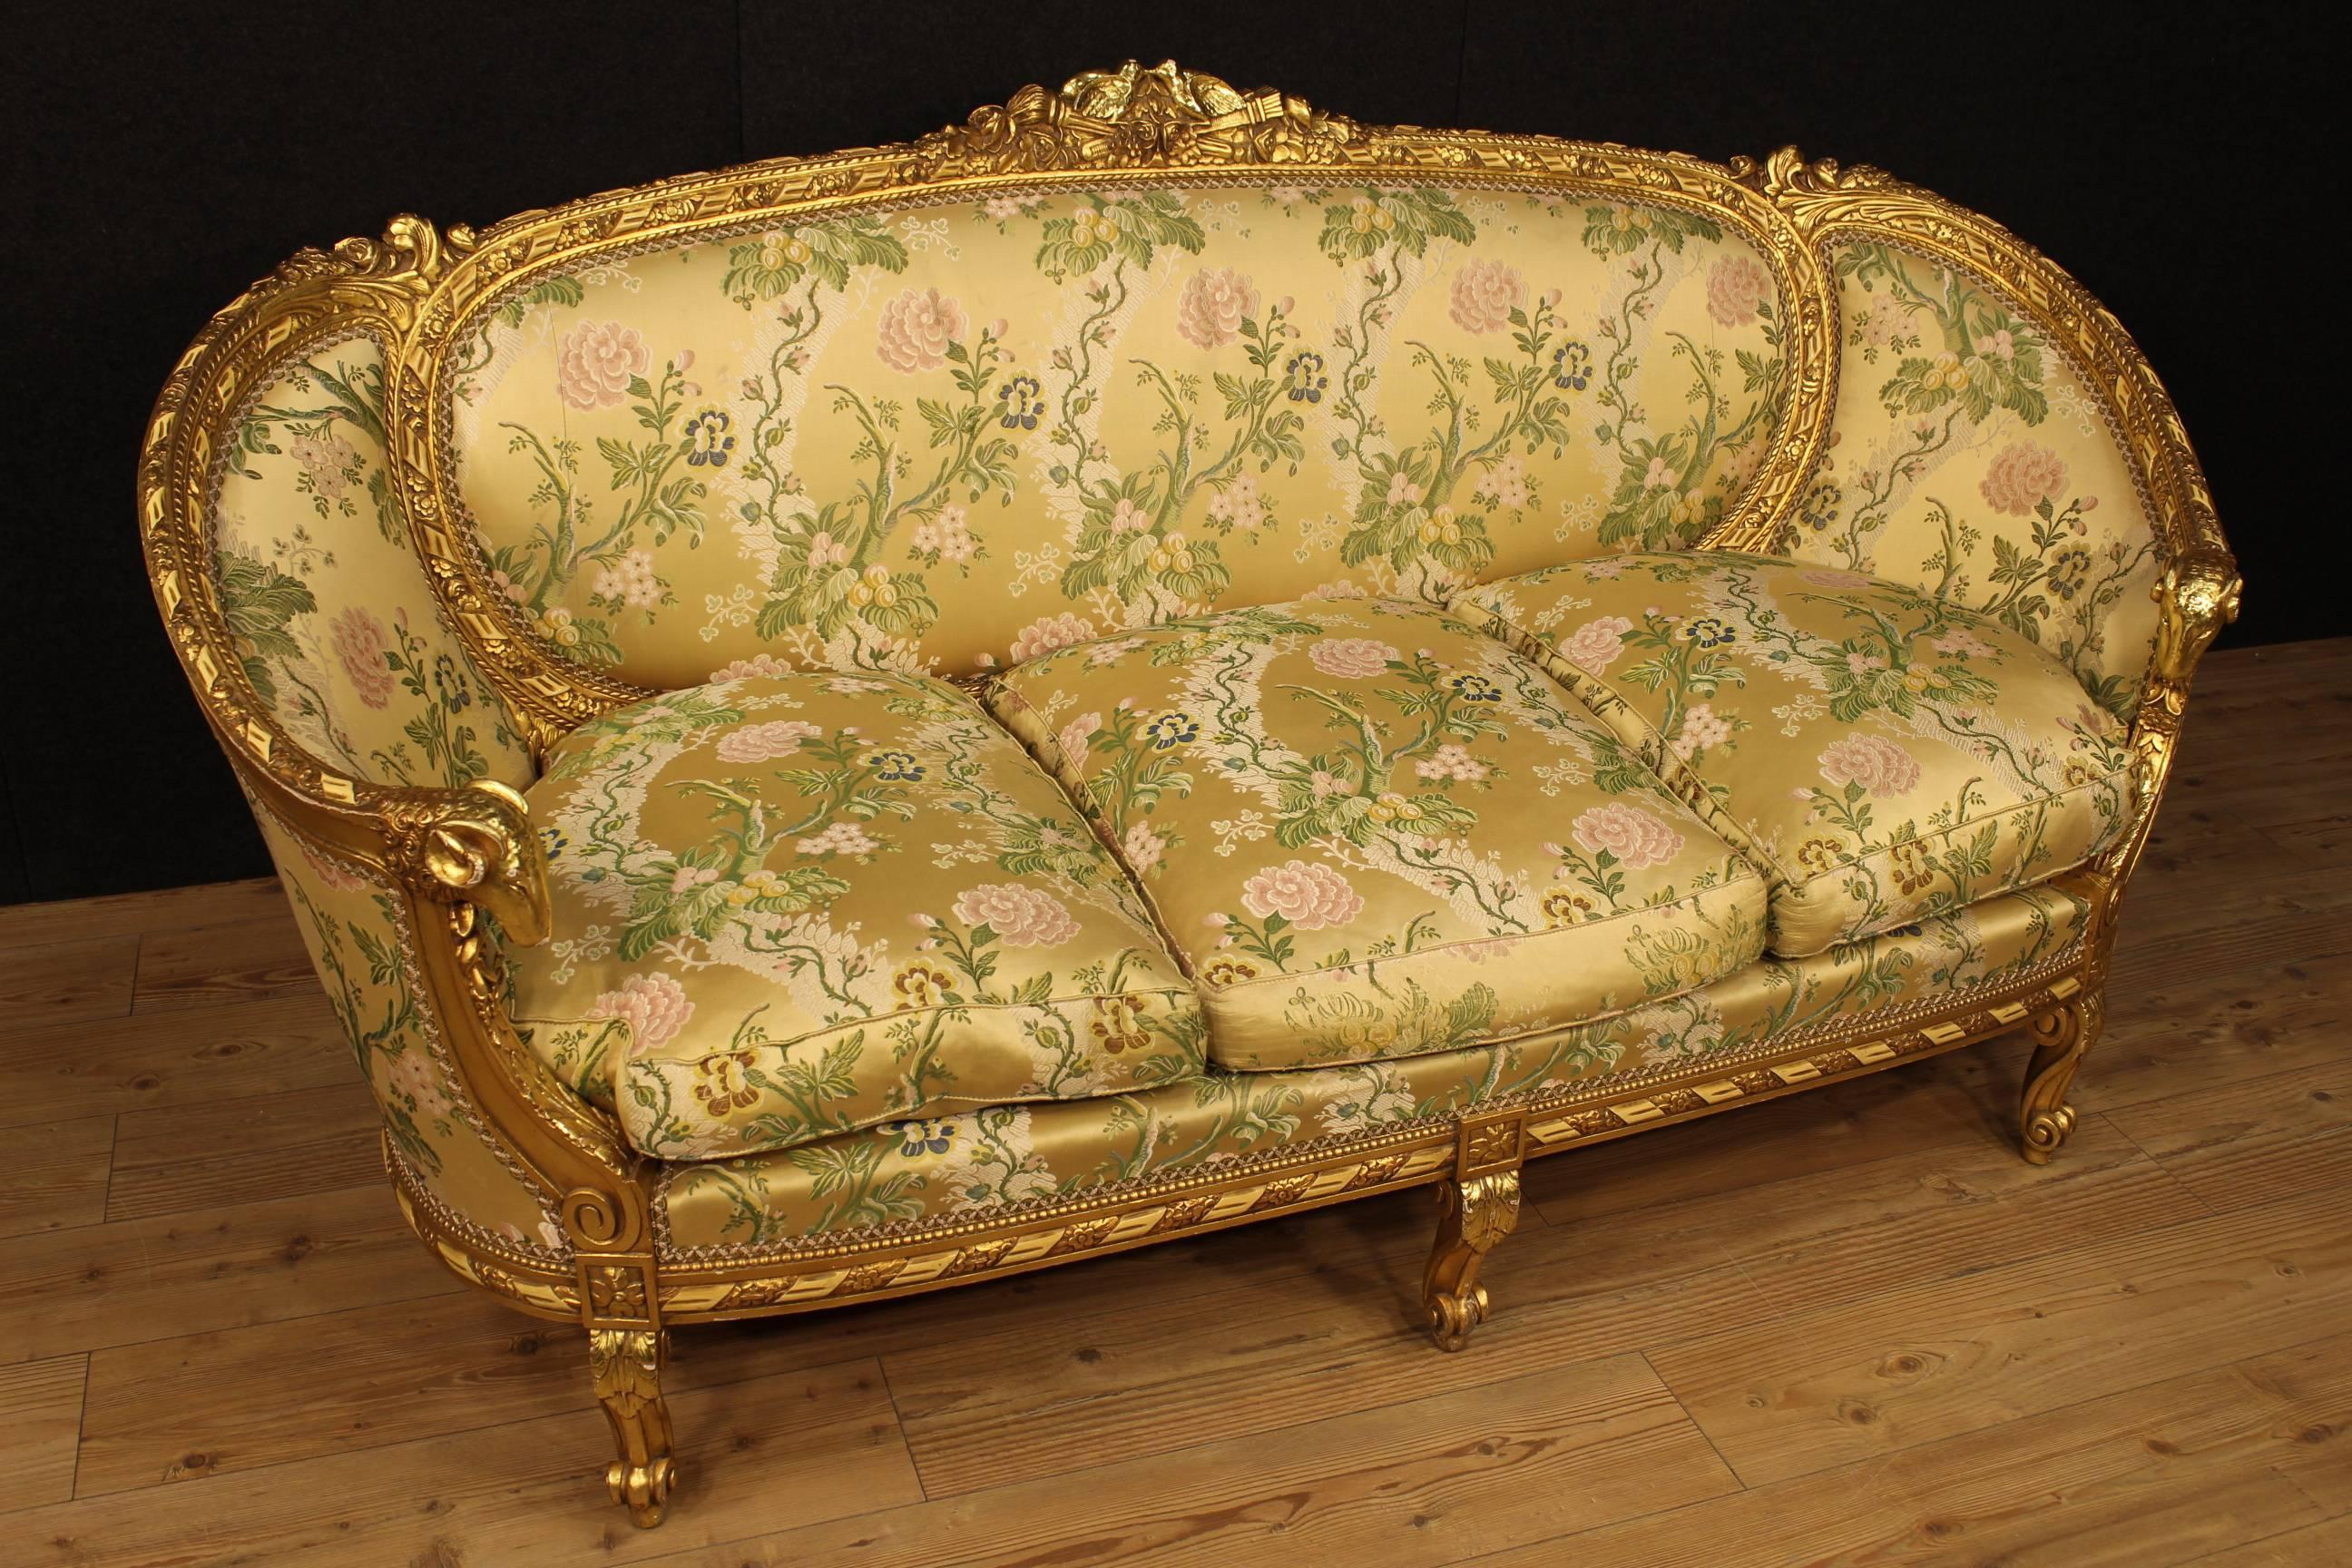 Italian sofa from the second half of the 20th century. Furniture in carved and golden wood with floral and animal motifs. Sofa with padding in good conditions. Floral fabric in good conditions with some small signs. Couch supported by six legs with